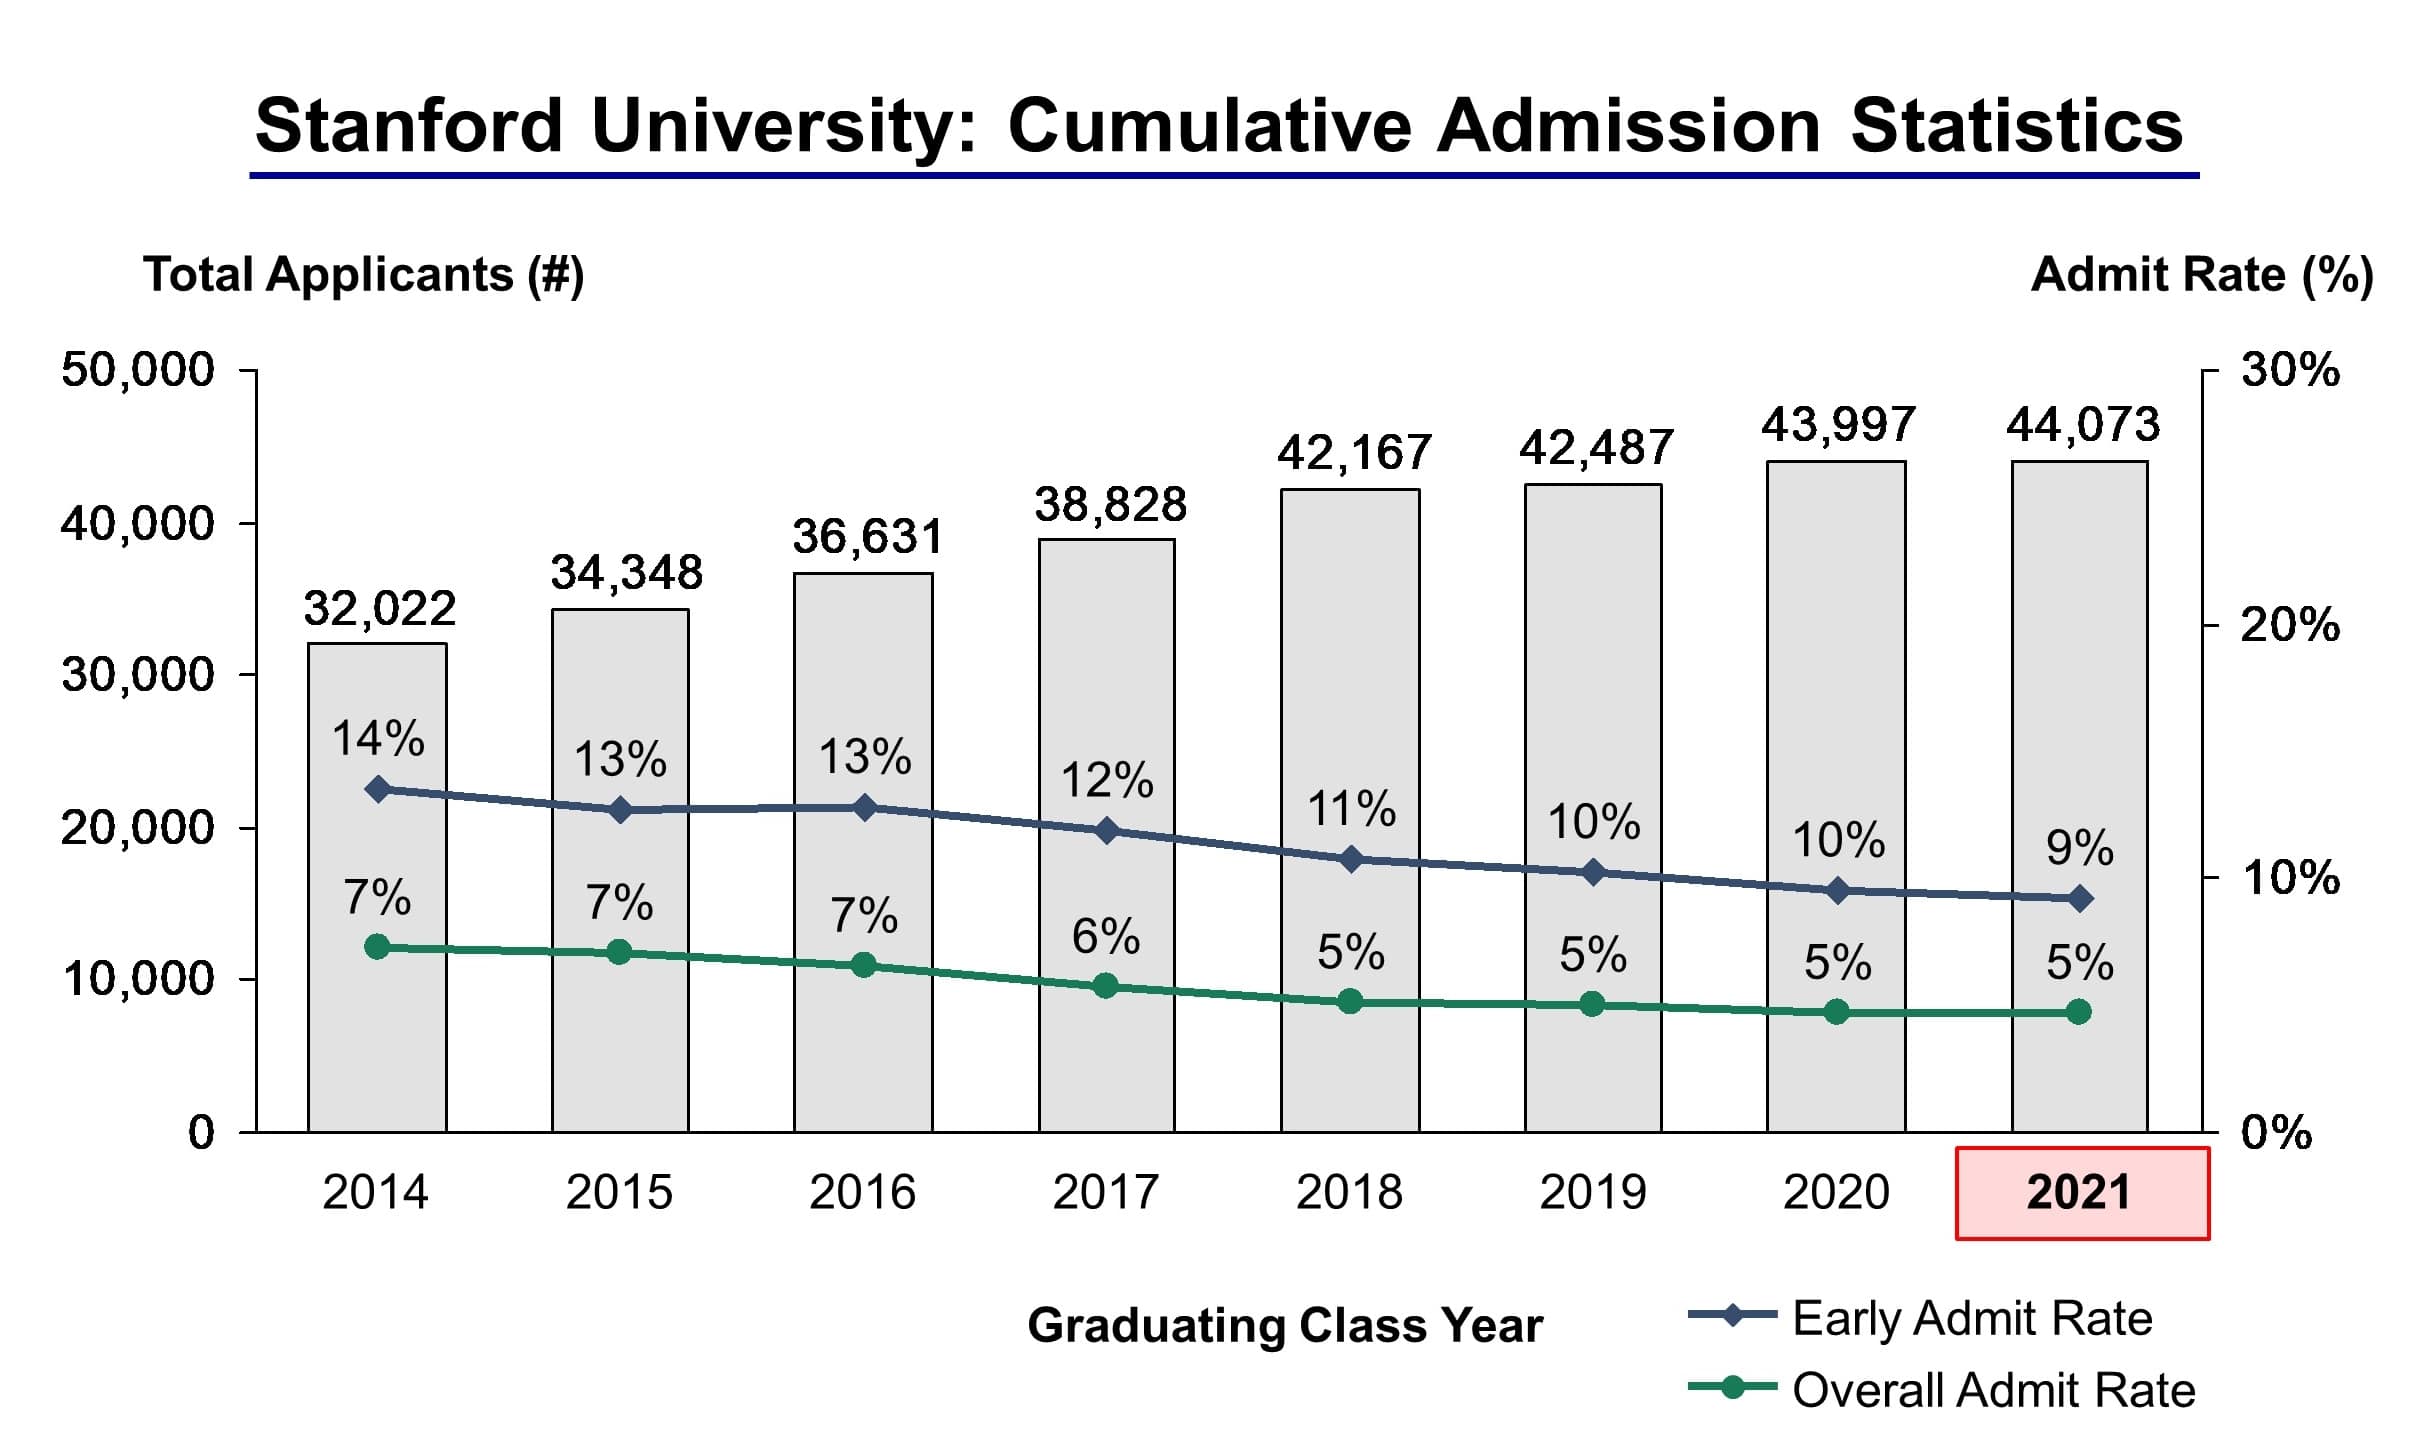 Stanford University Admission Statistics Class of 2021 - IVY League